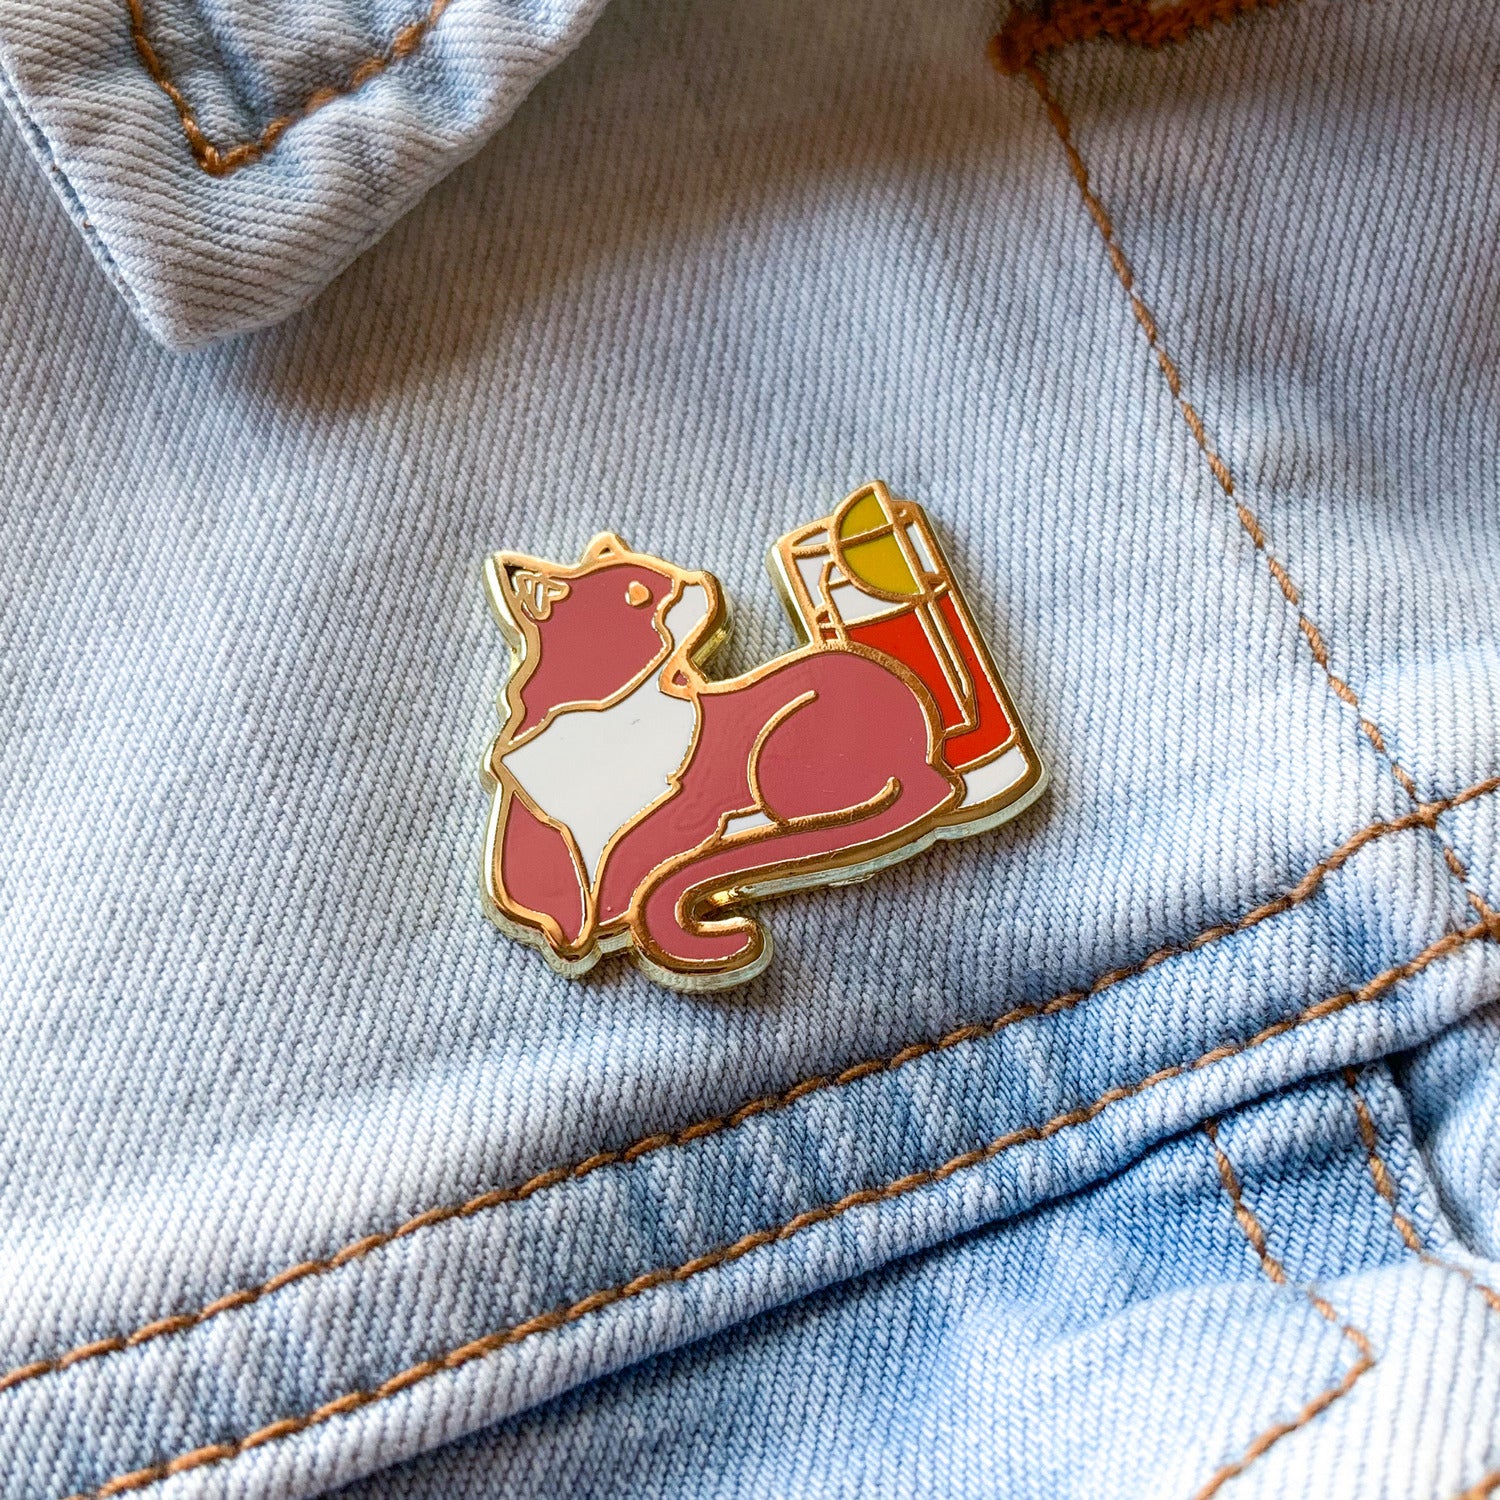 Taby Cat & Americano Cocktail Hard Enamel Pin by Cocktail Critters